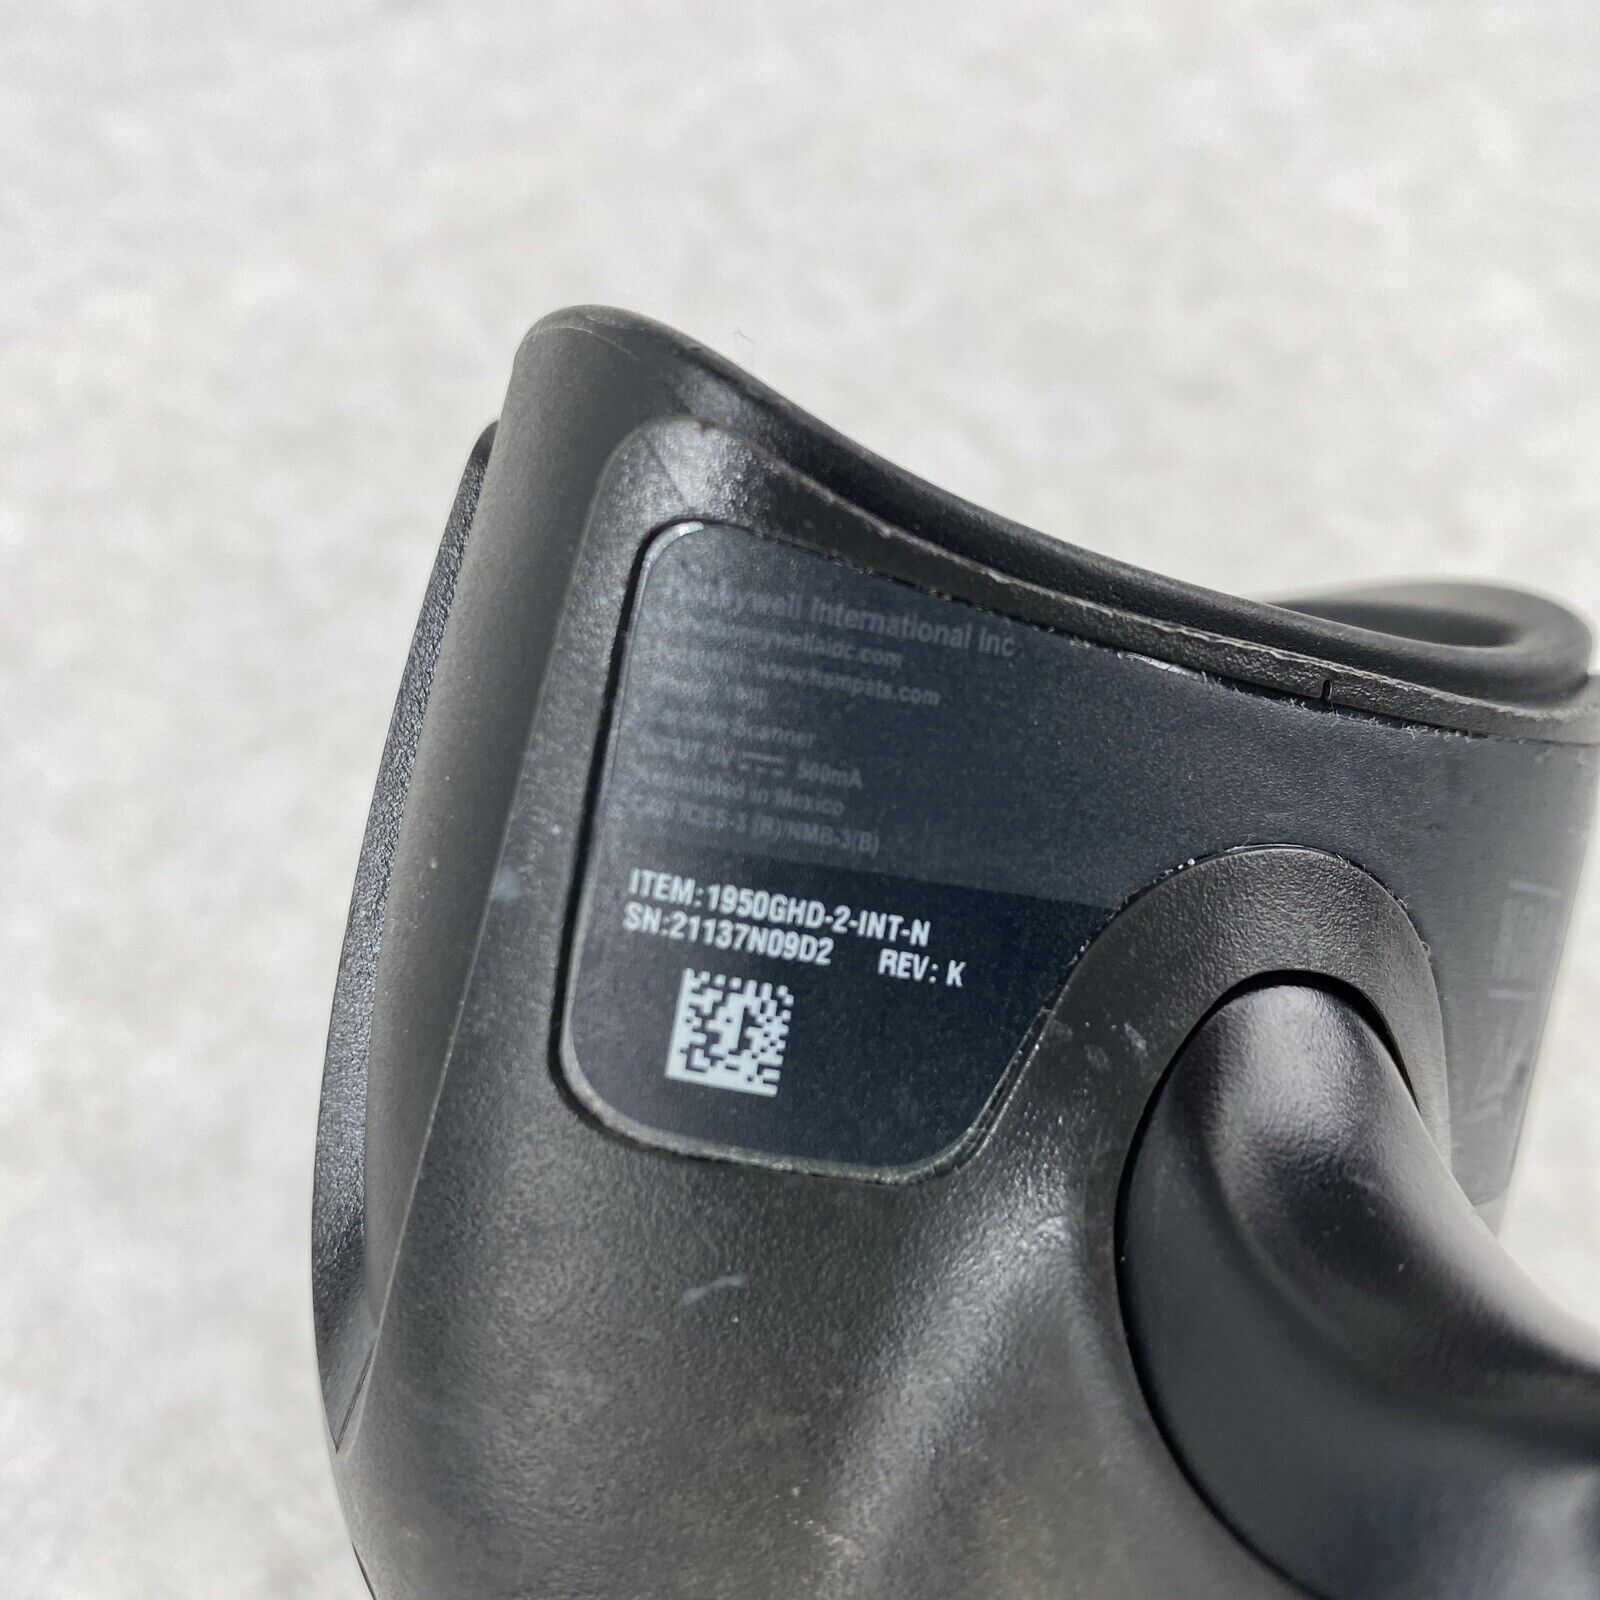 Honeywell 1950 1950GHD-2-INT-N Handheld USB Barcode Scanner + USB Cable